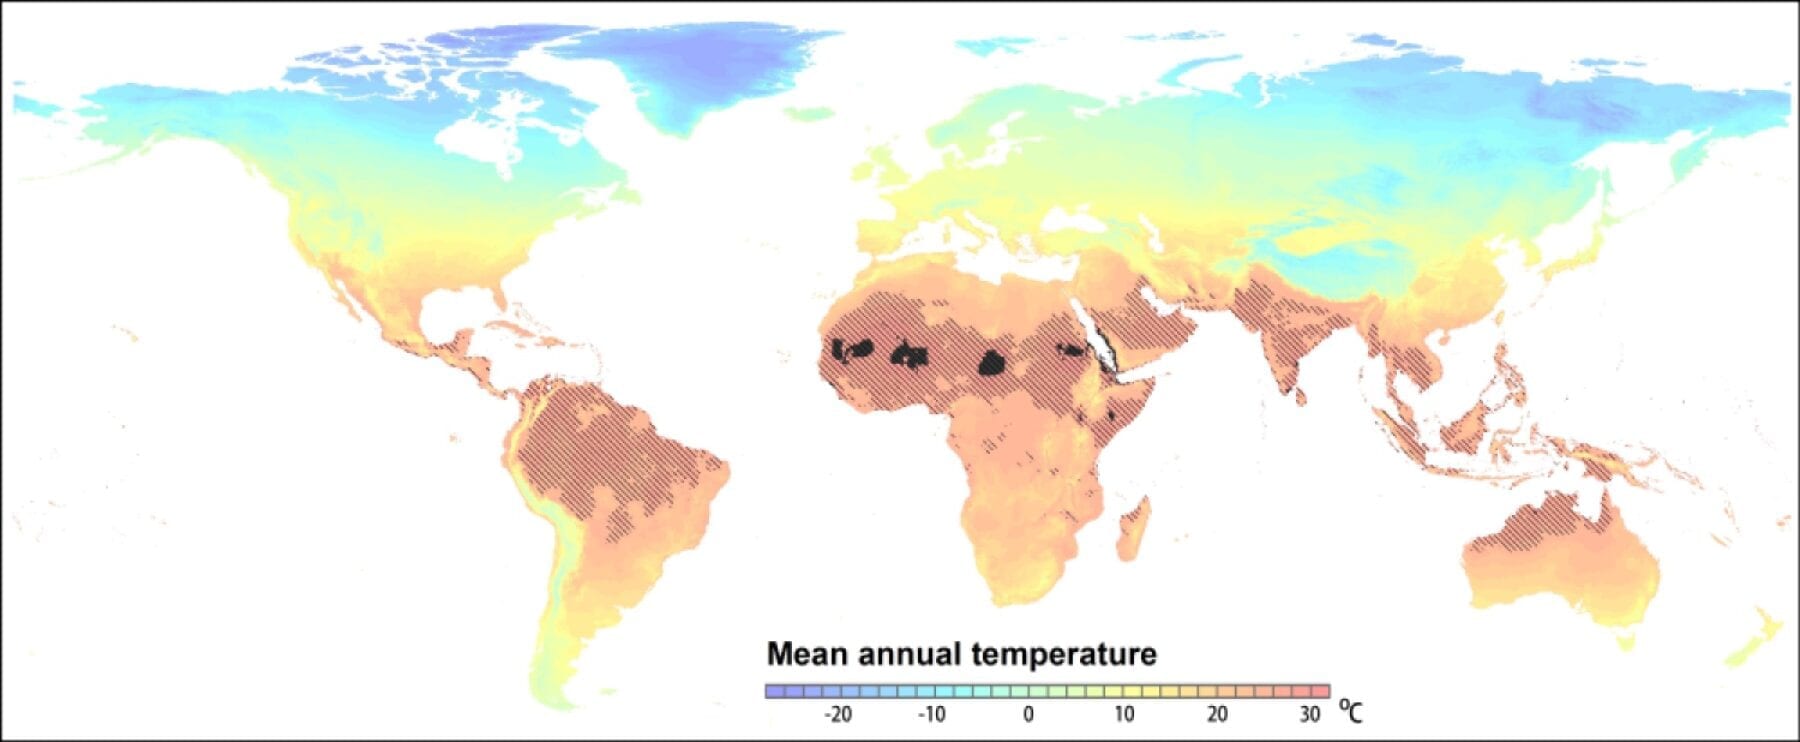 Expansion of extremely hot regions in a business-as-usual climate scenario. In the current climate, mean annual temperatures >29? are restricted to the small dark areas in the Sahara region. In 2070 such conditions are projected to occur throughout the shaded area following the RCP 8.5 scenario